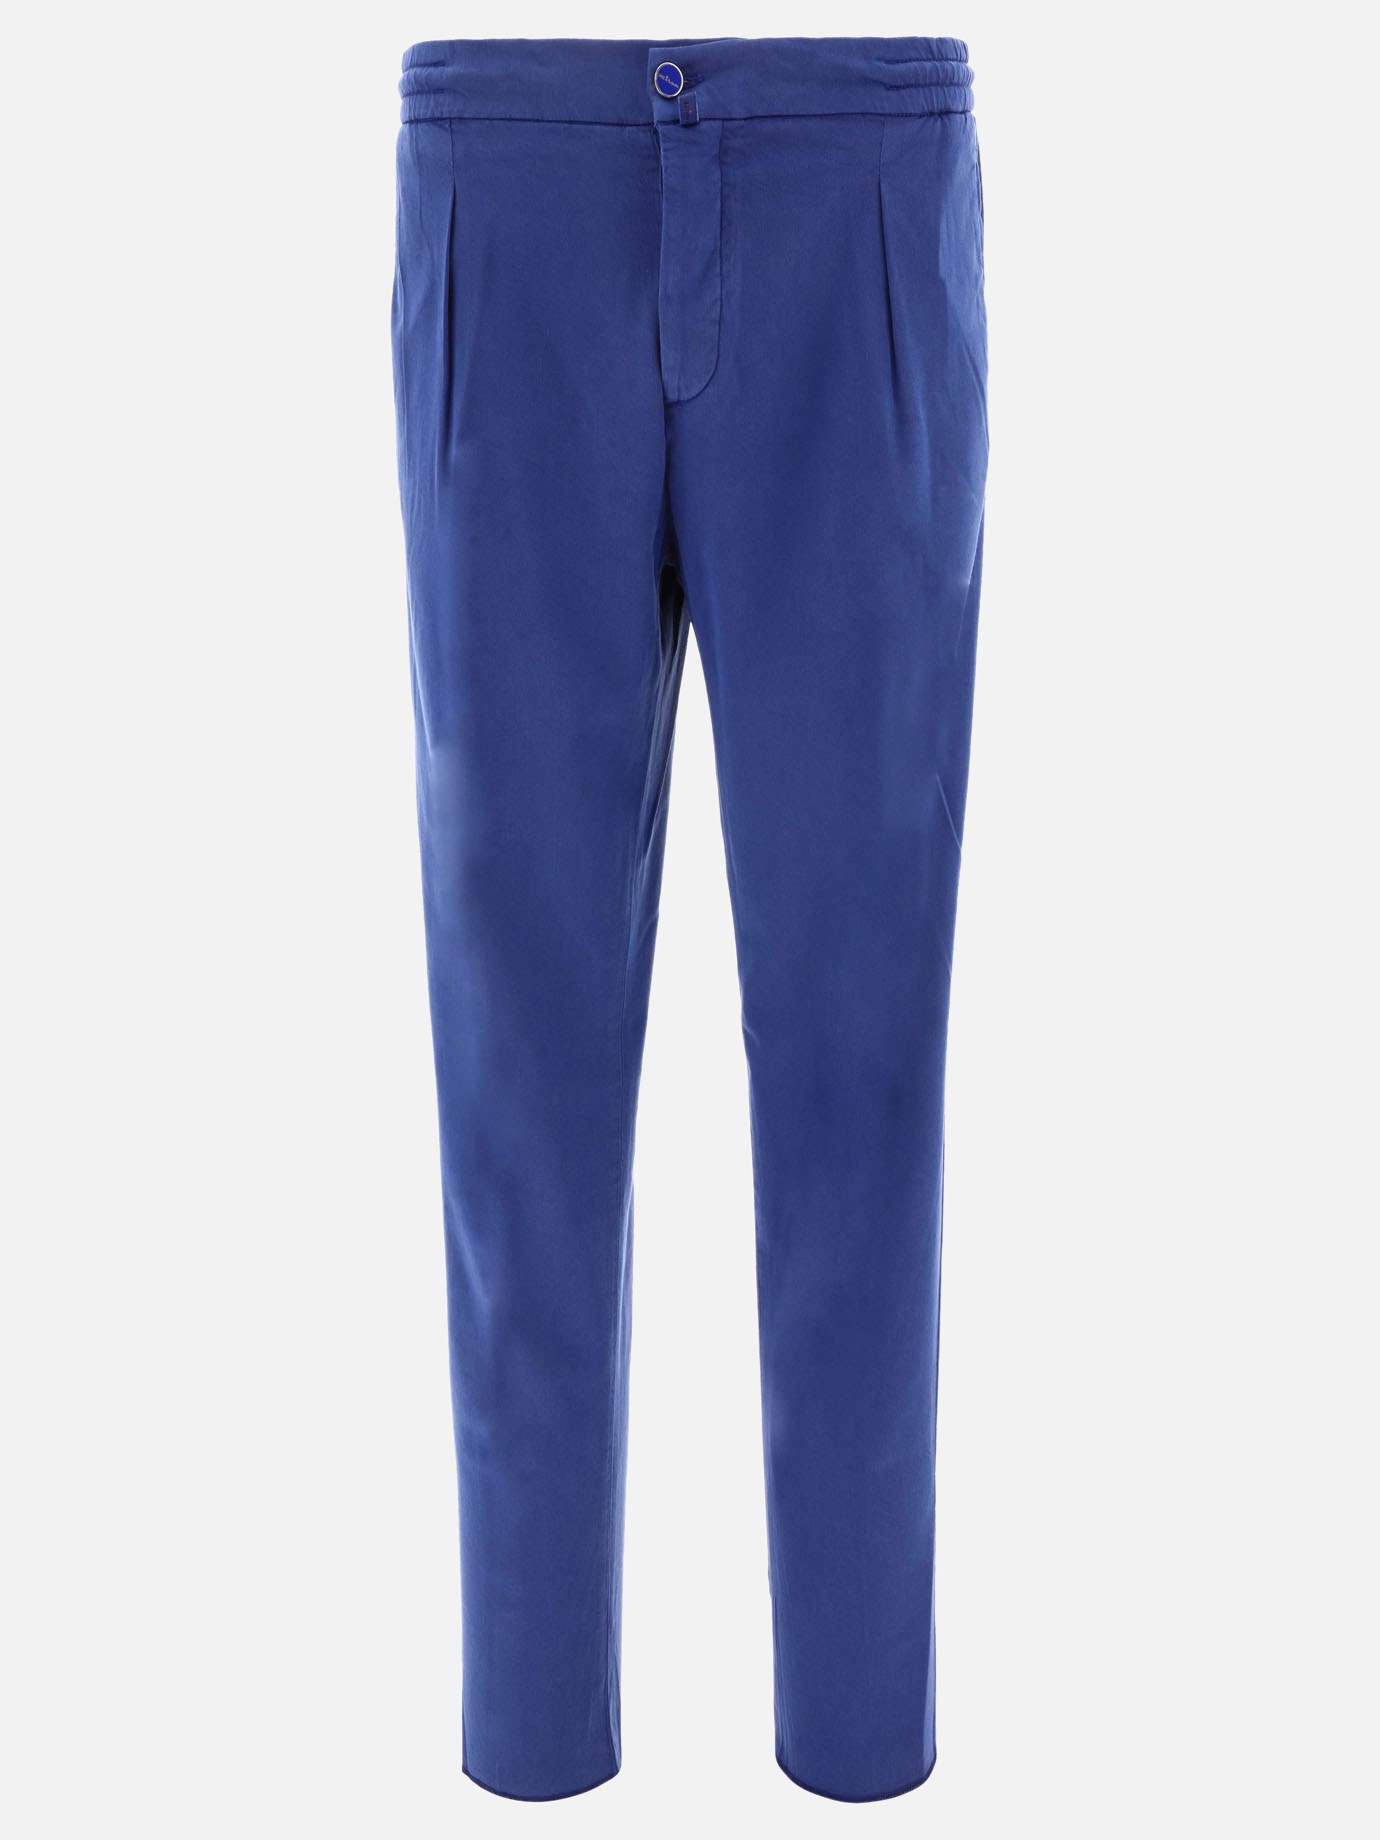 Trousers with drawstringsby Kiton - 0